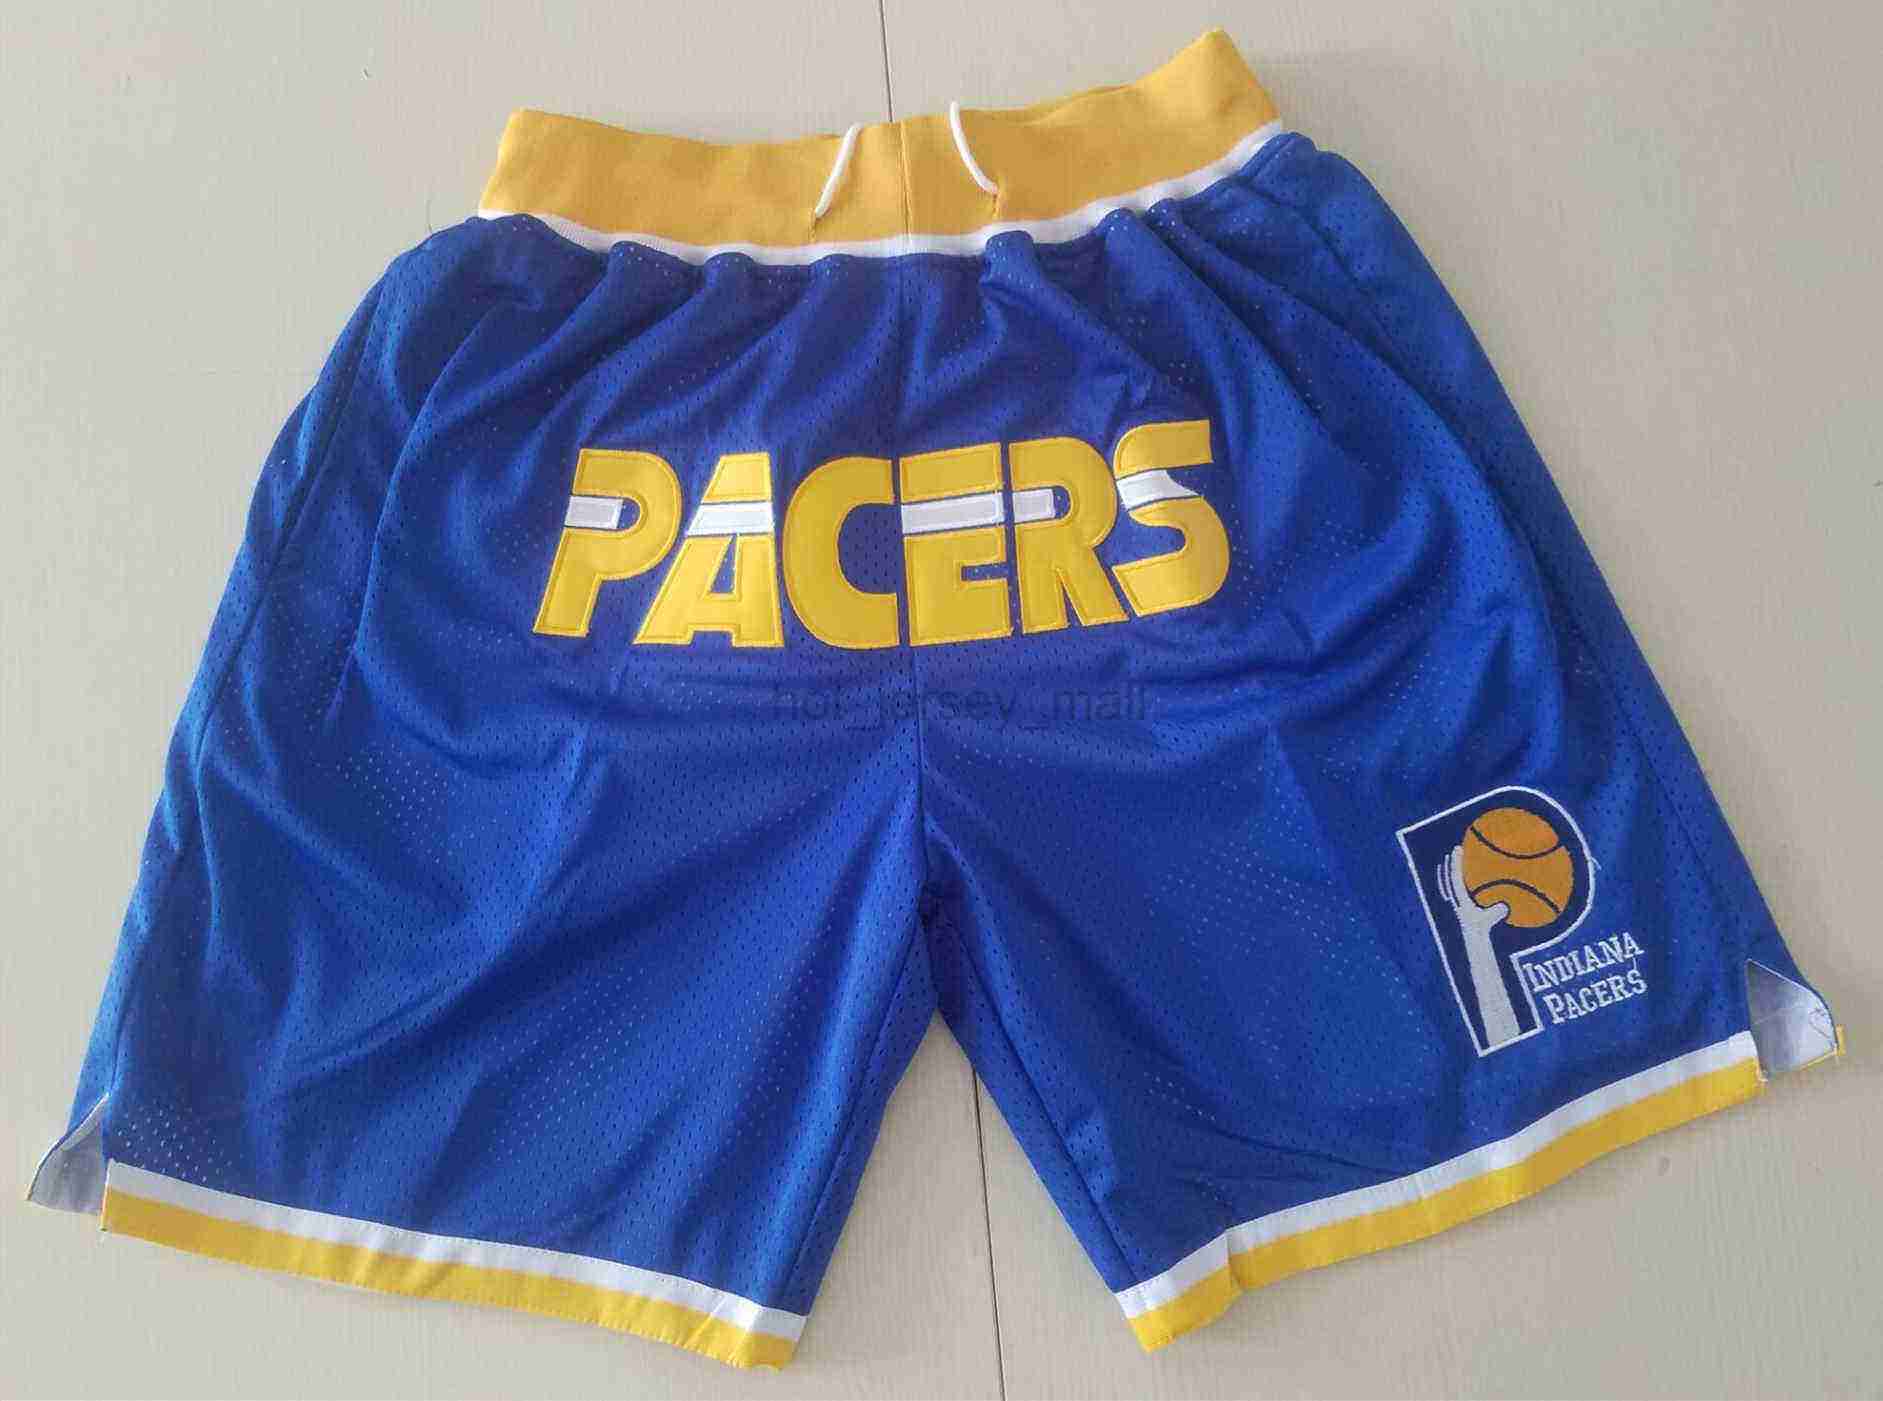 

Indiana''Pacers''Men Basketball Shorts JUST DON Stitched Mitchell and Ness With Pocket Zipper Sweatpants Mesh Retro Sport PANTS -2XL Short